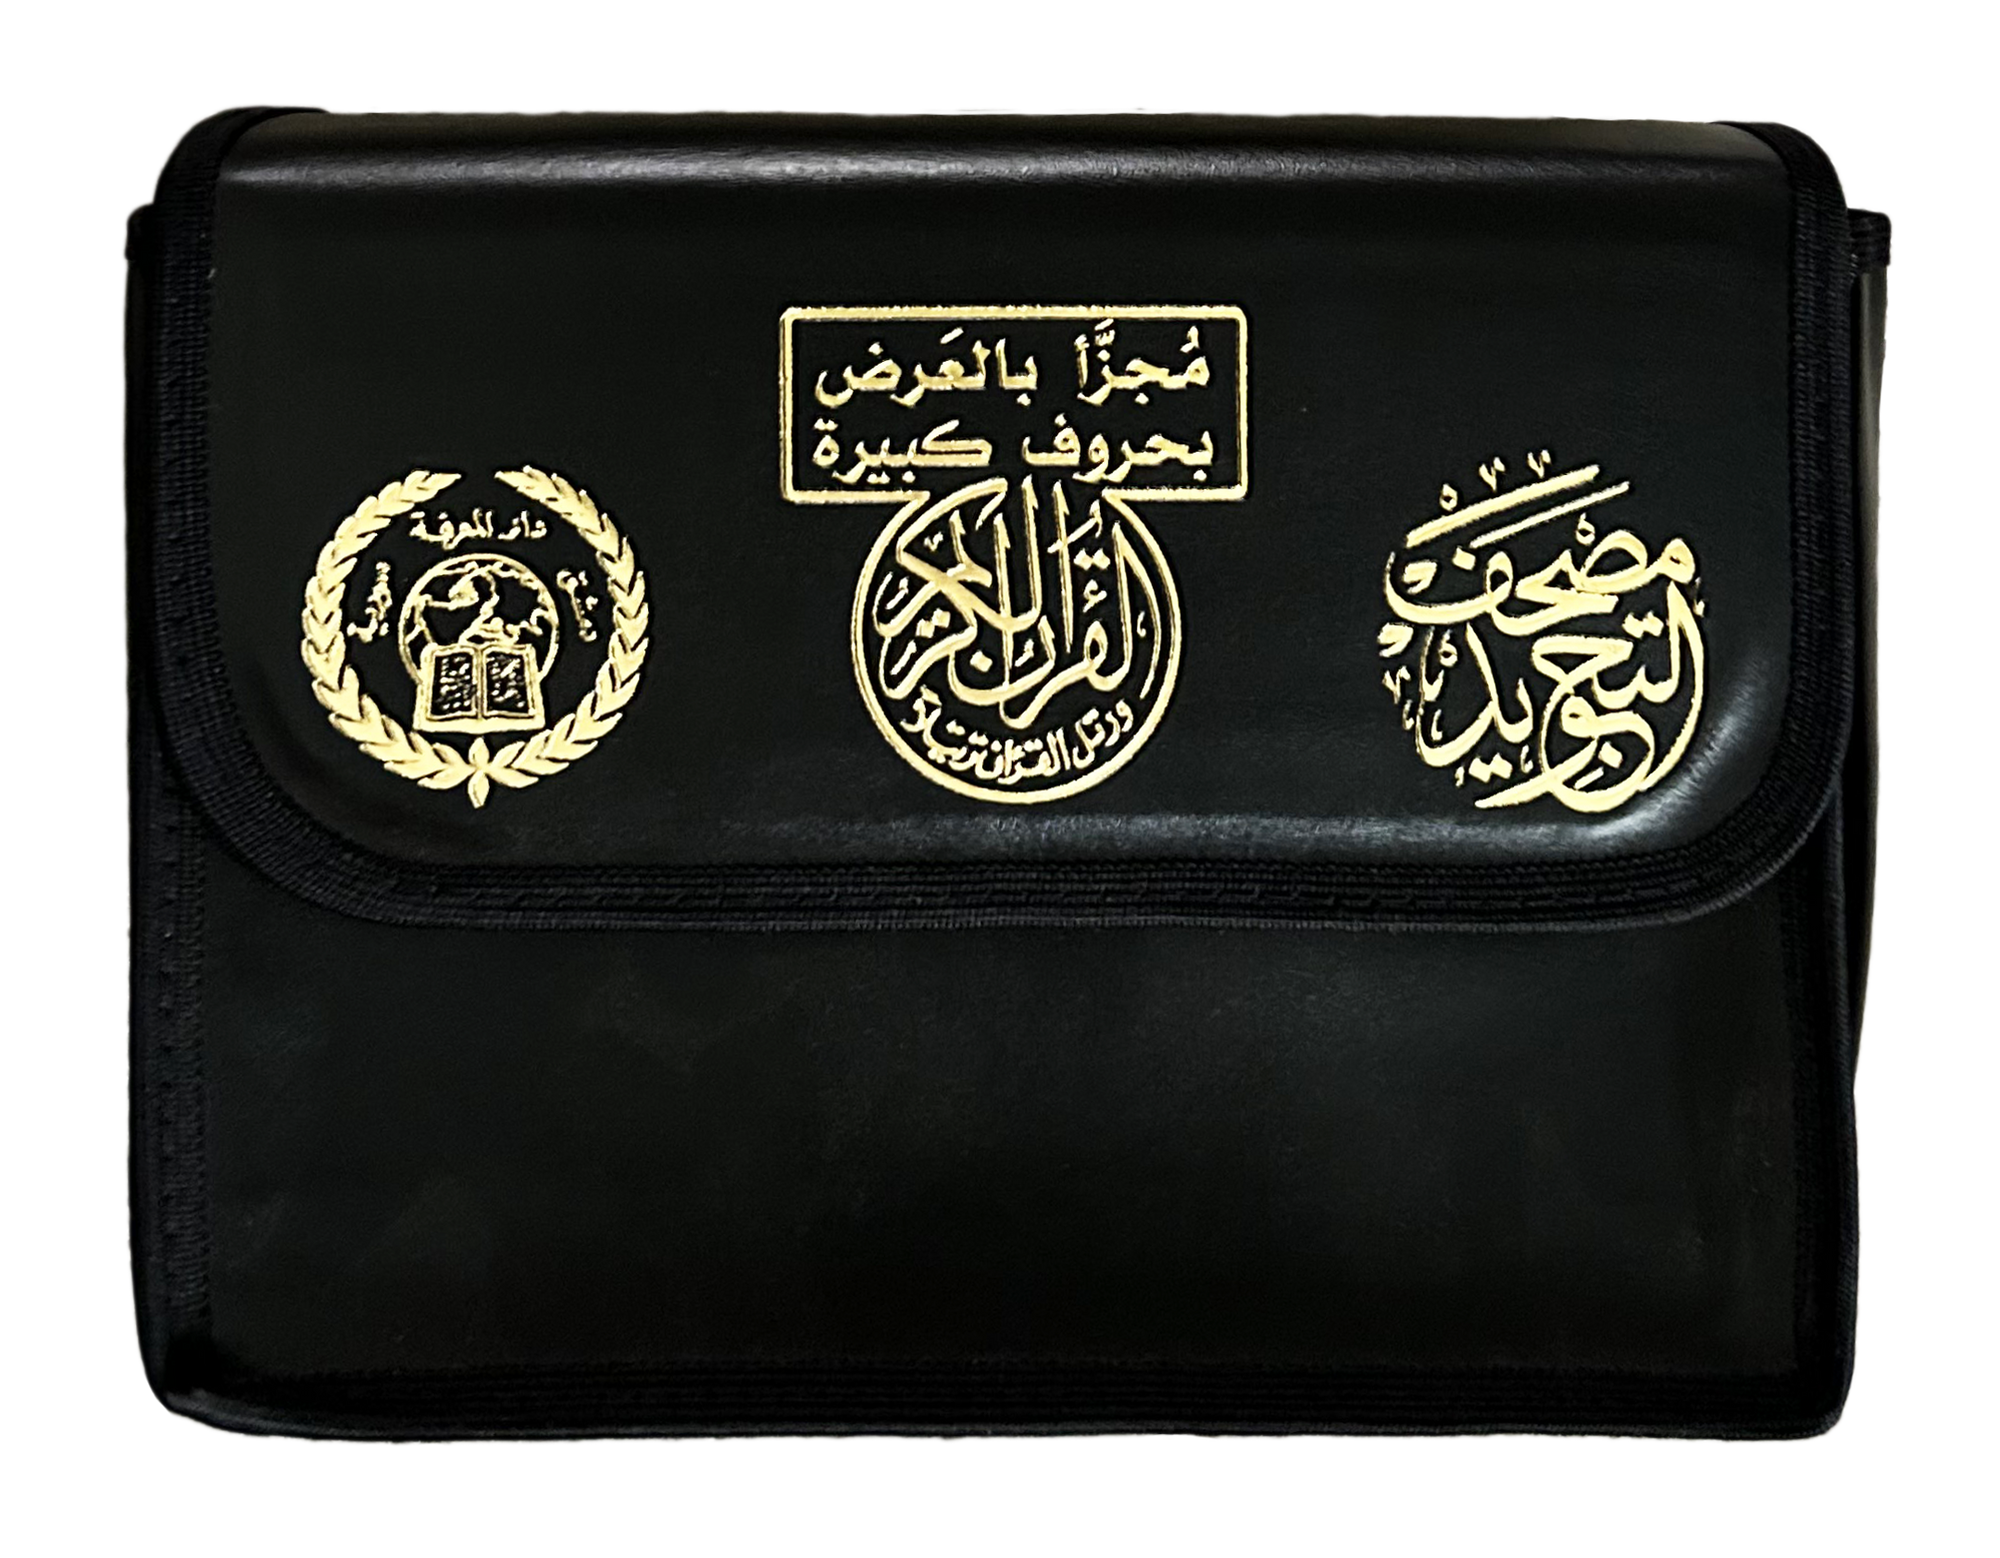 Color Coded Tajweed Quran in 30 Parts - Landscape Pages in Leather Case (7"x9") مصحف التجويد